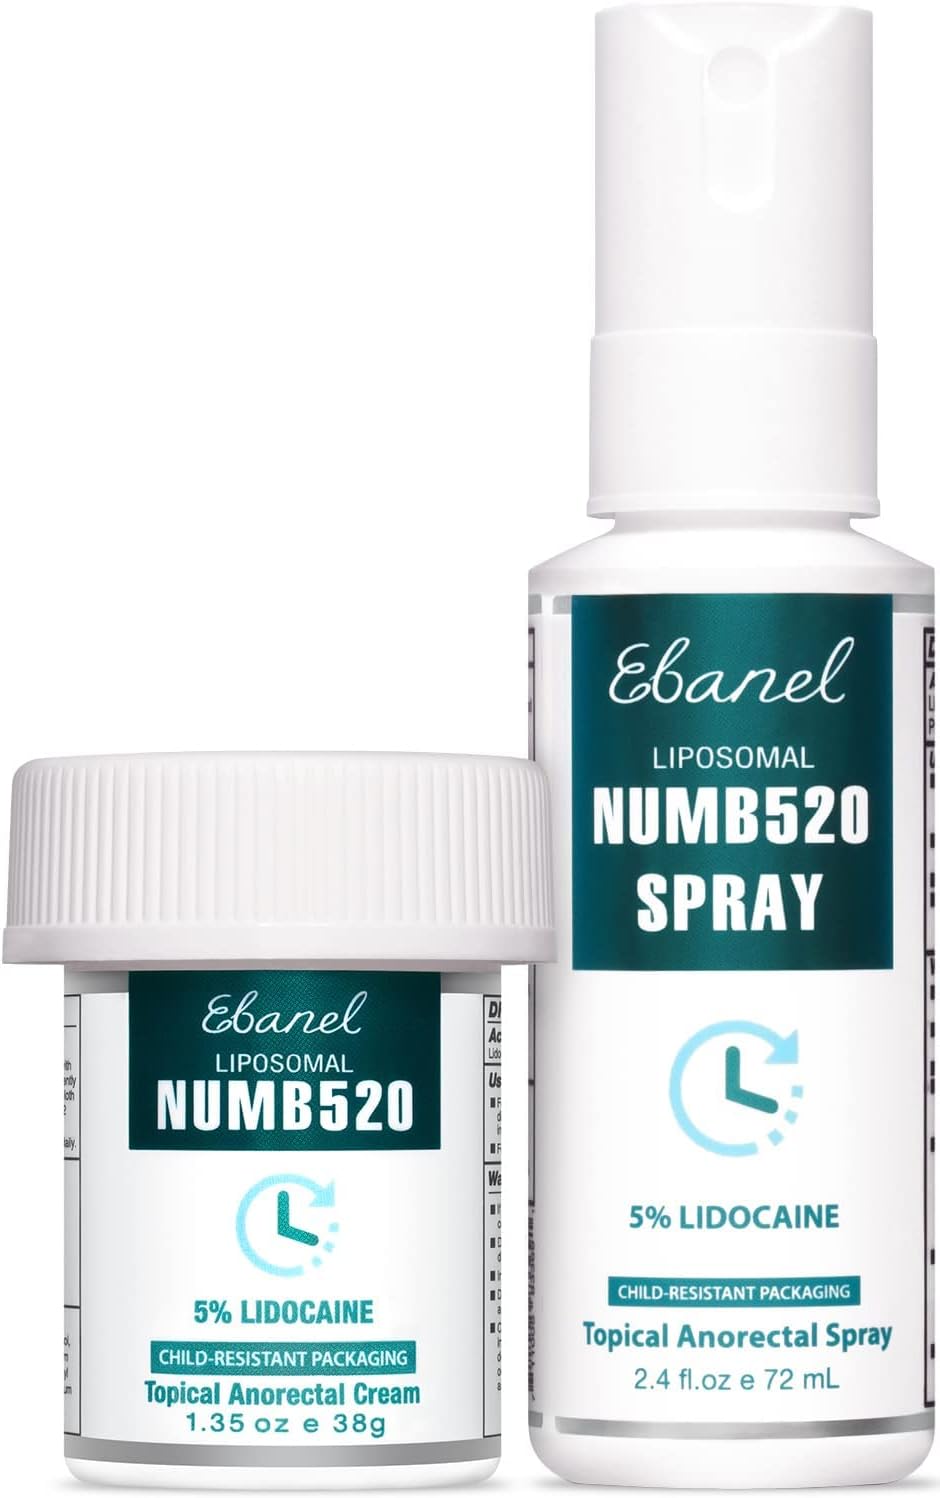 Ebanel Set of 5% Lidocaine Numbing Cream and 5% Lidocaine Spray Pain Relief Numbing Spray for Skin, Topical Anesthetic Pain Relief Burn Itch Relief Cream and Spray Set for Local and Anorectal Uses